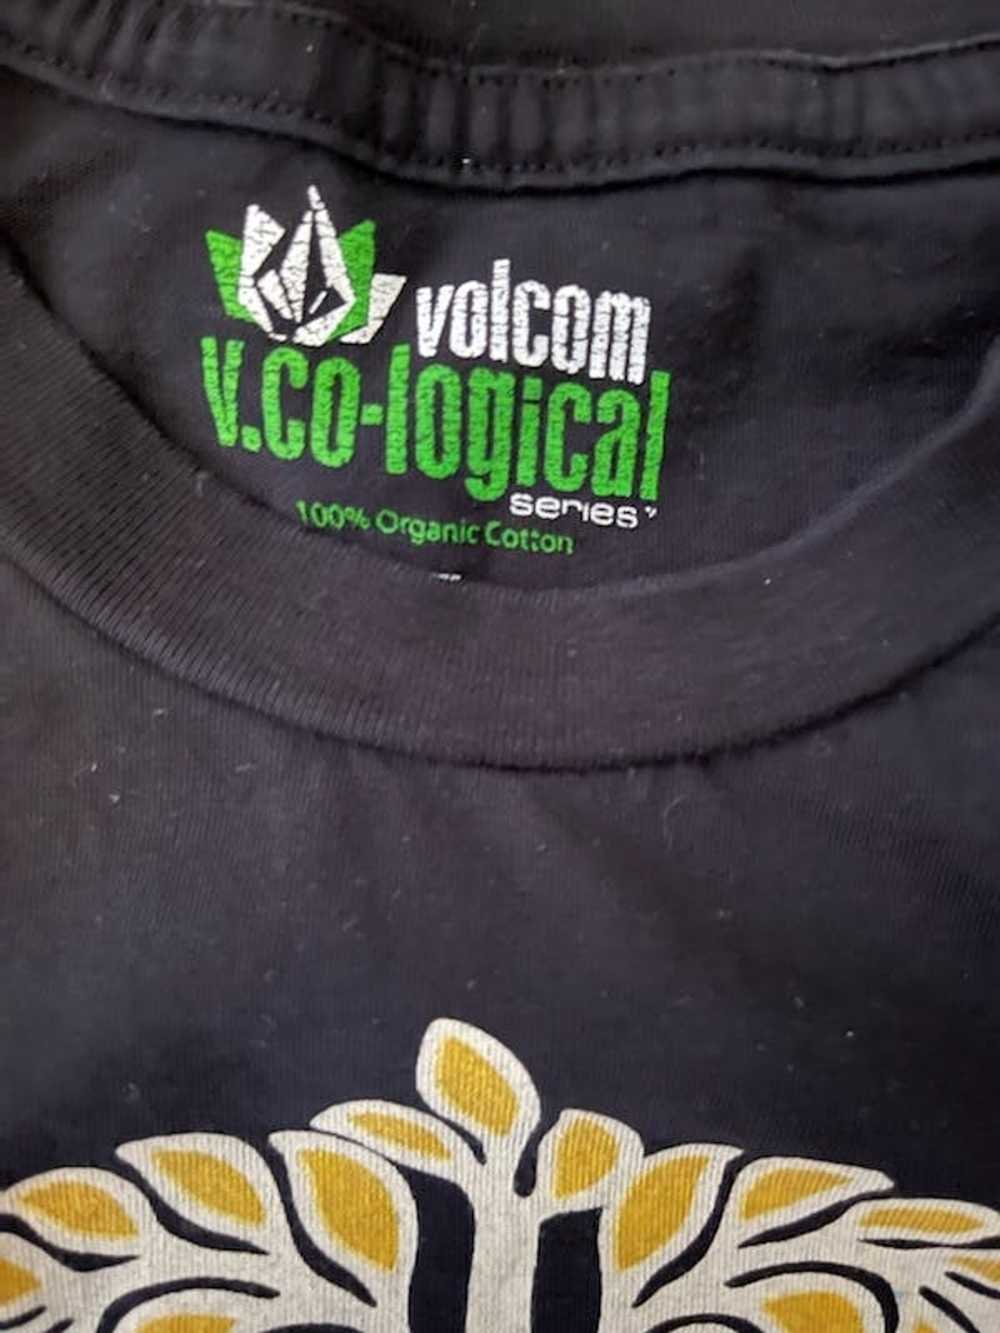 Volcom Peace Tree-T w/ pro-recycle message - image 4